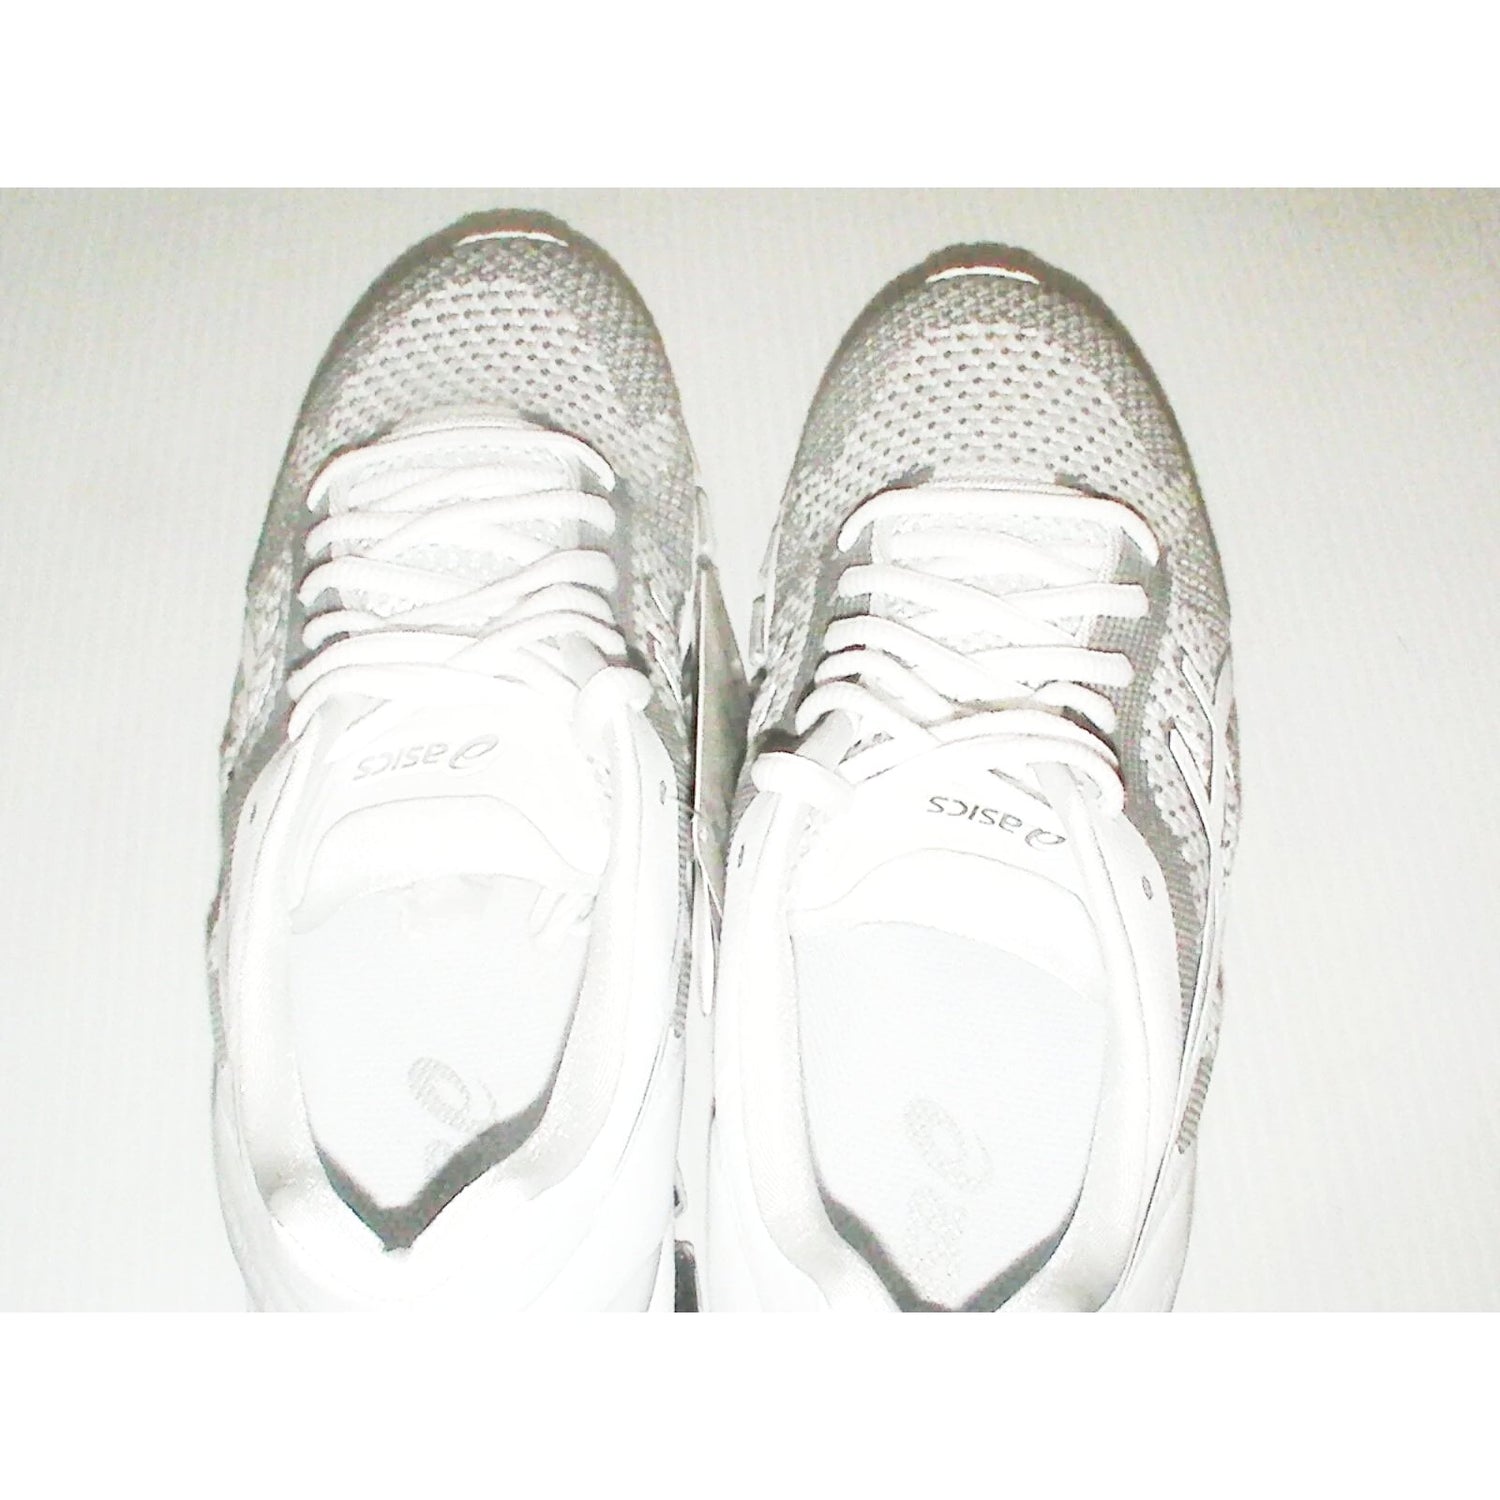 Asics women's running shoes gel quantum 360 knit white snow silver size 8.5 us